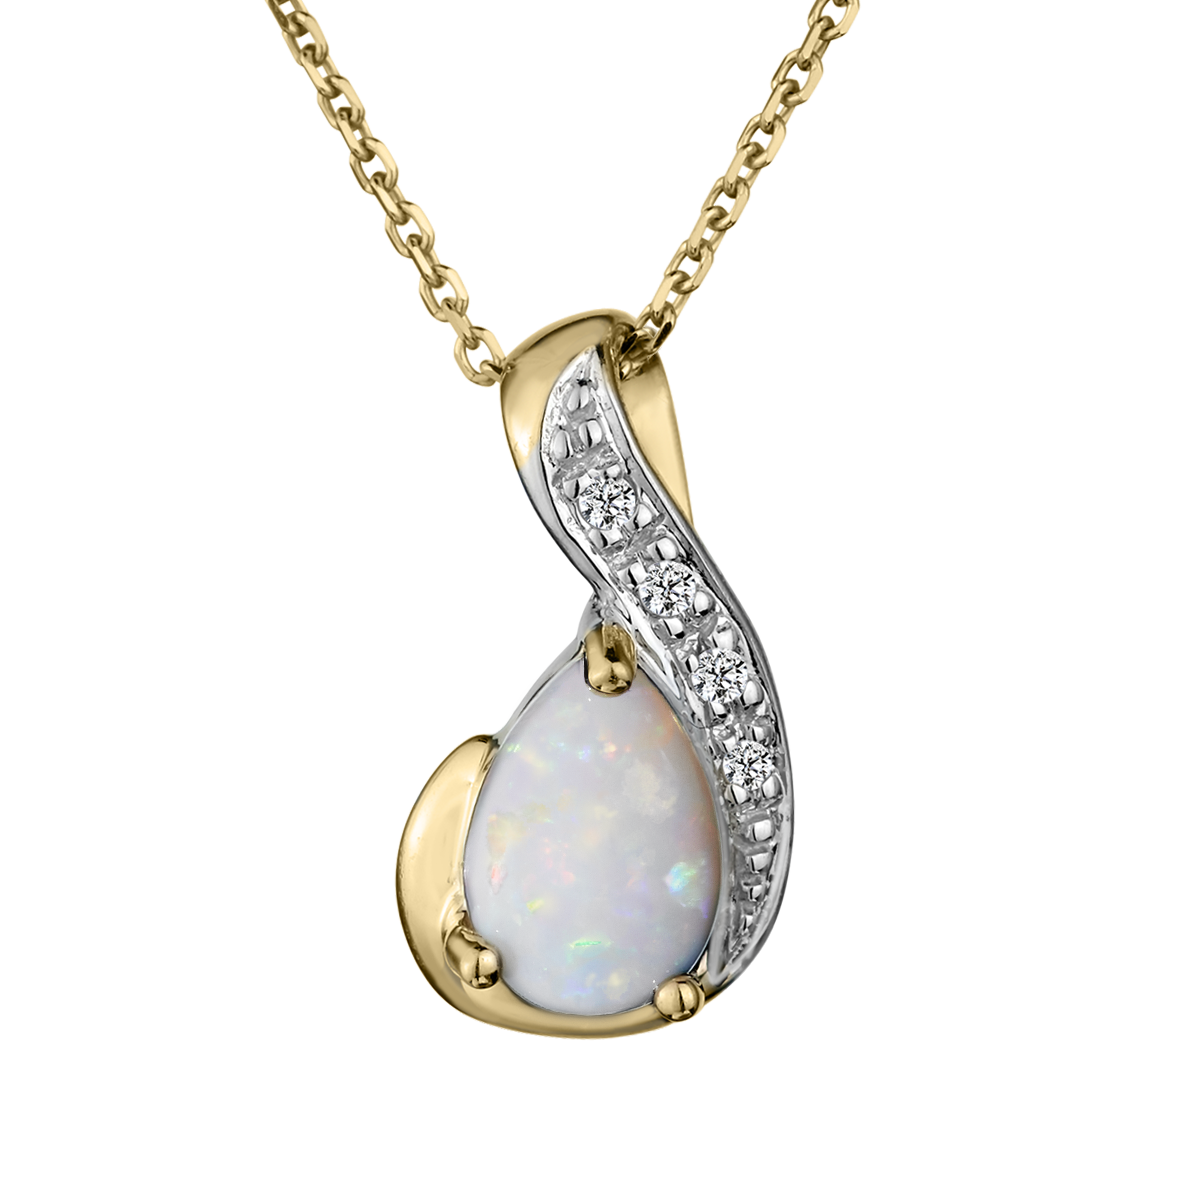 Genuine Opal & Diamond Pendant, 10kt Yellow Gold. Necklaces and Pendants. Griffin Jewellery Designs.